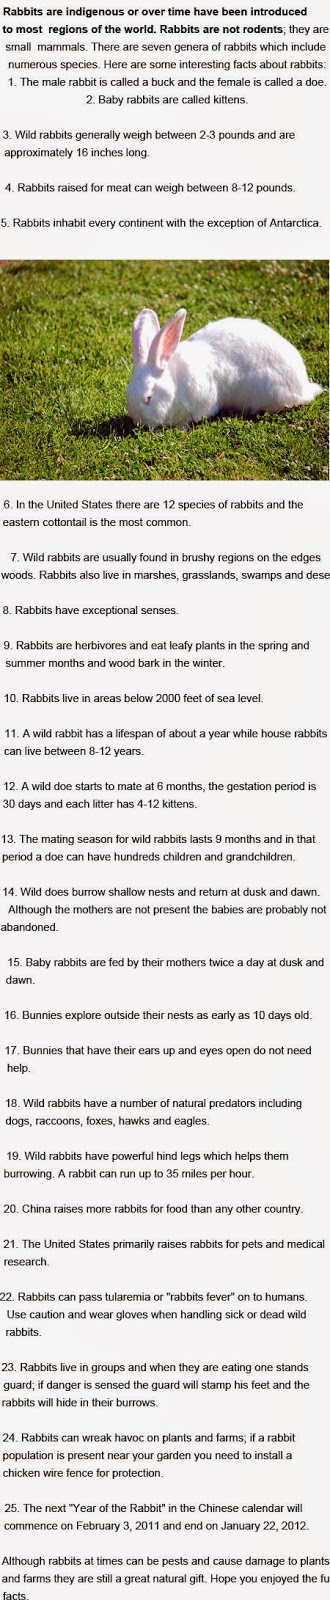 Facts about rabbits for kids